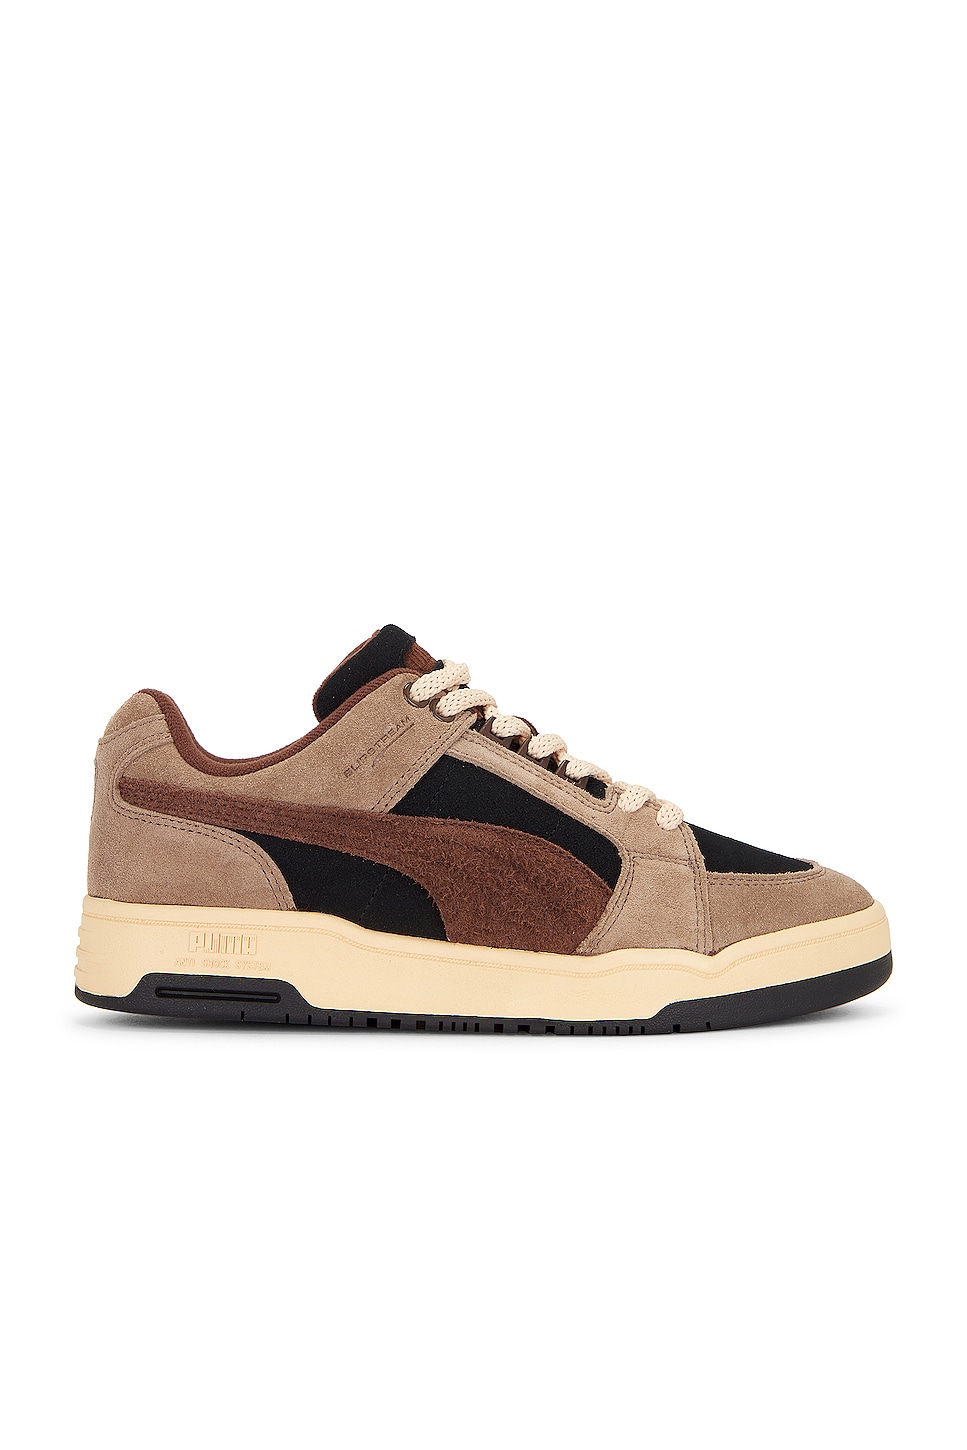 Image 1 of Puma Select Slipstream Lo Texture Sneaker in Black, Totally Taupe, & Chestnut Brown